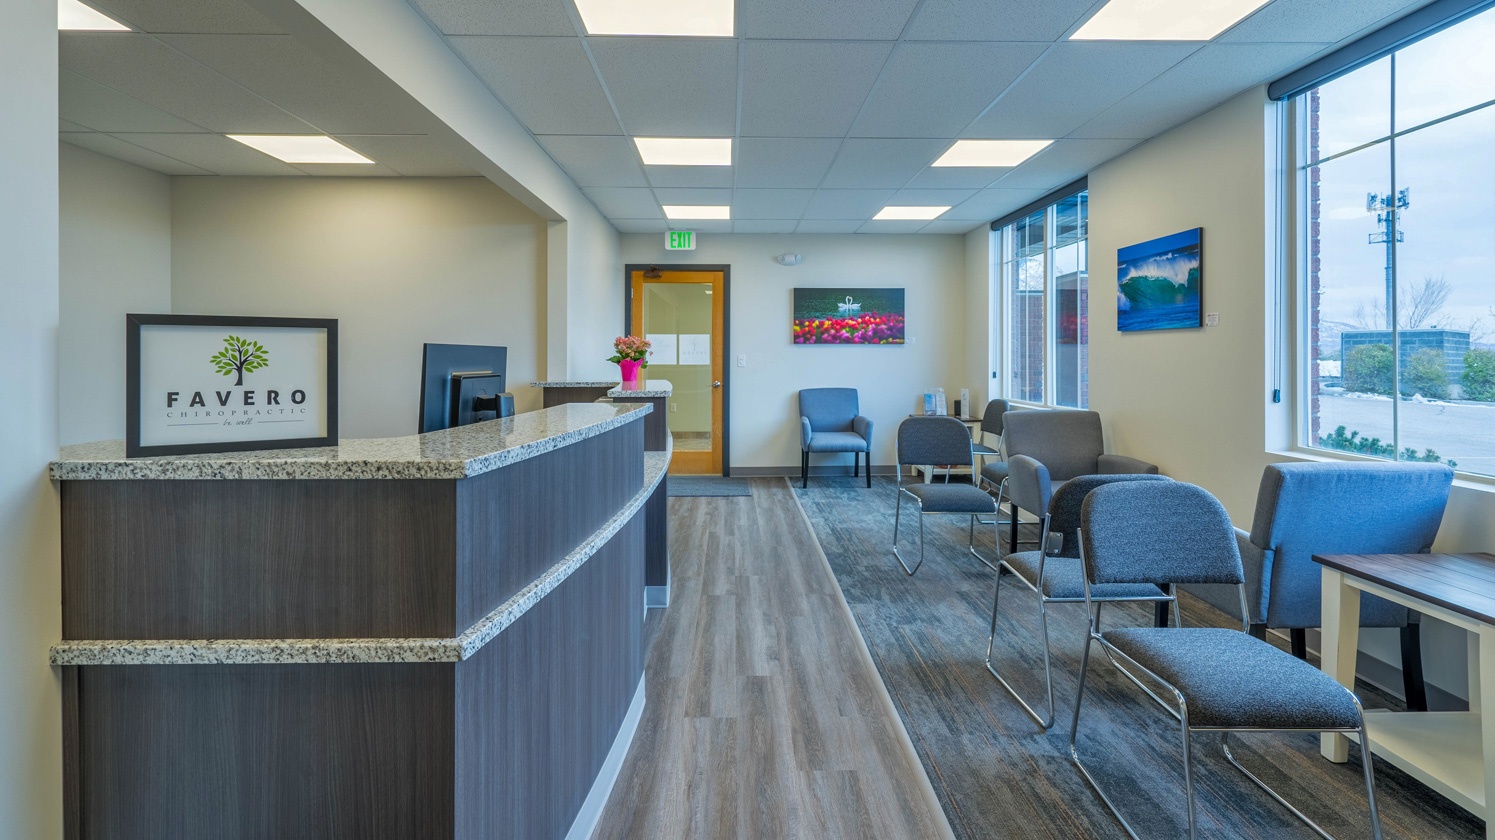 Reception Room at Favero Chiropractic